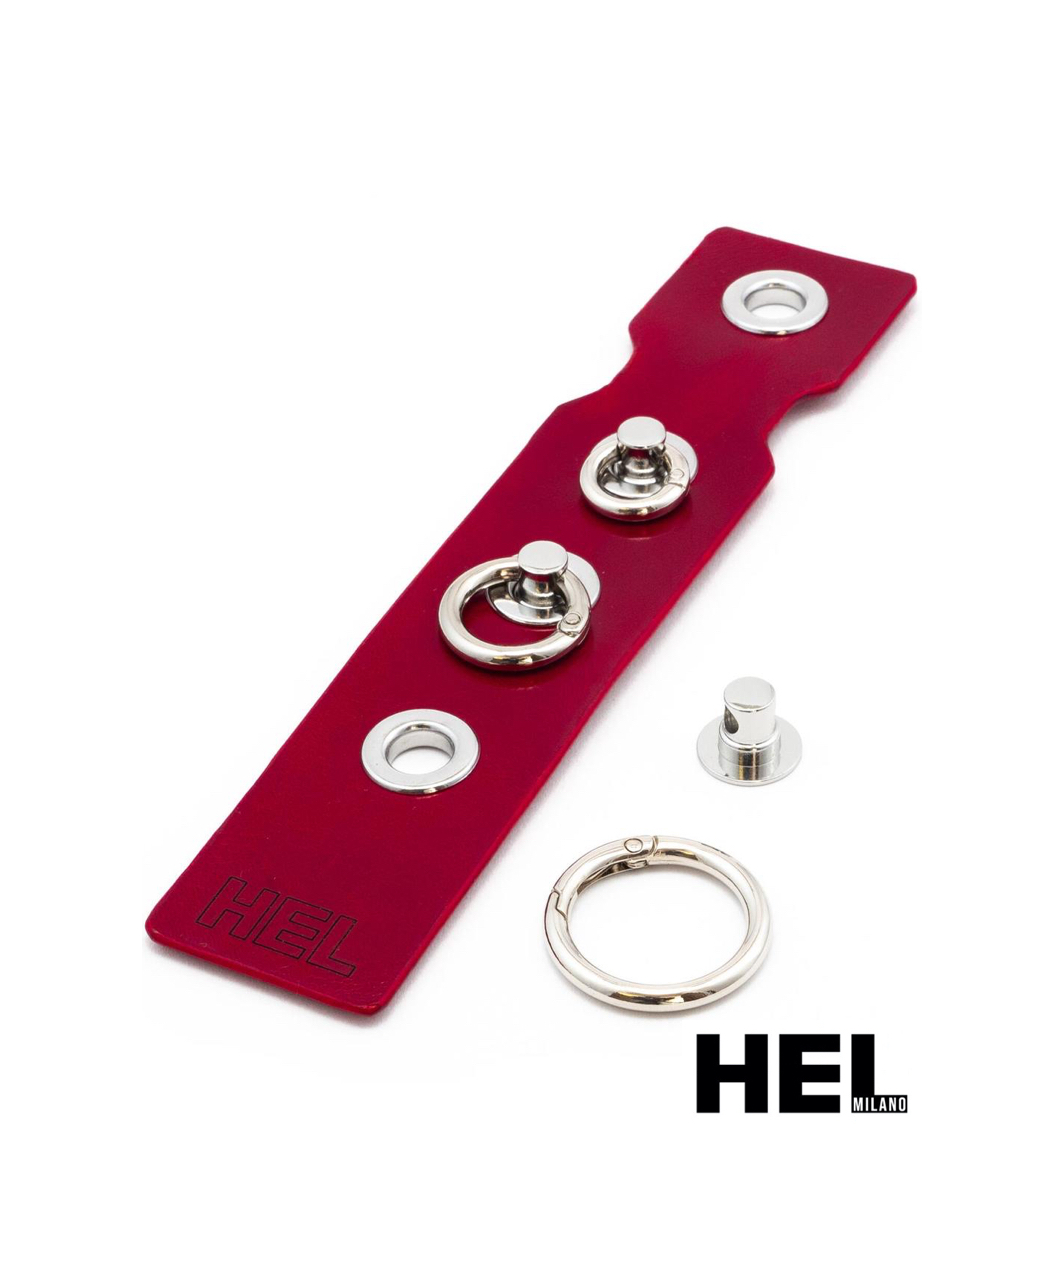 HEL Milano leather ring display